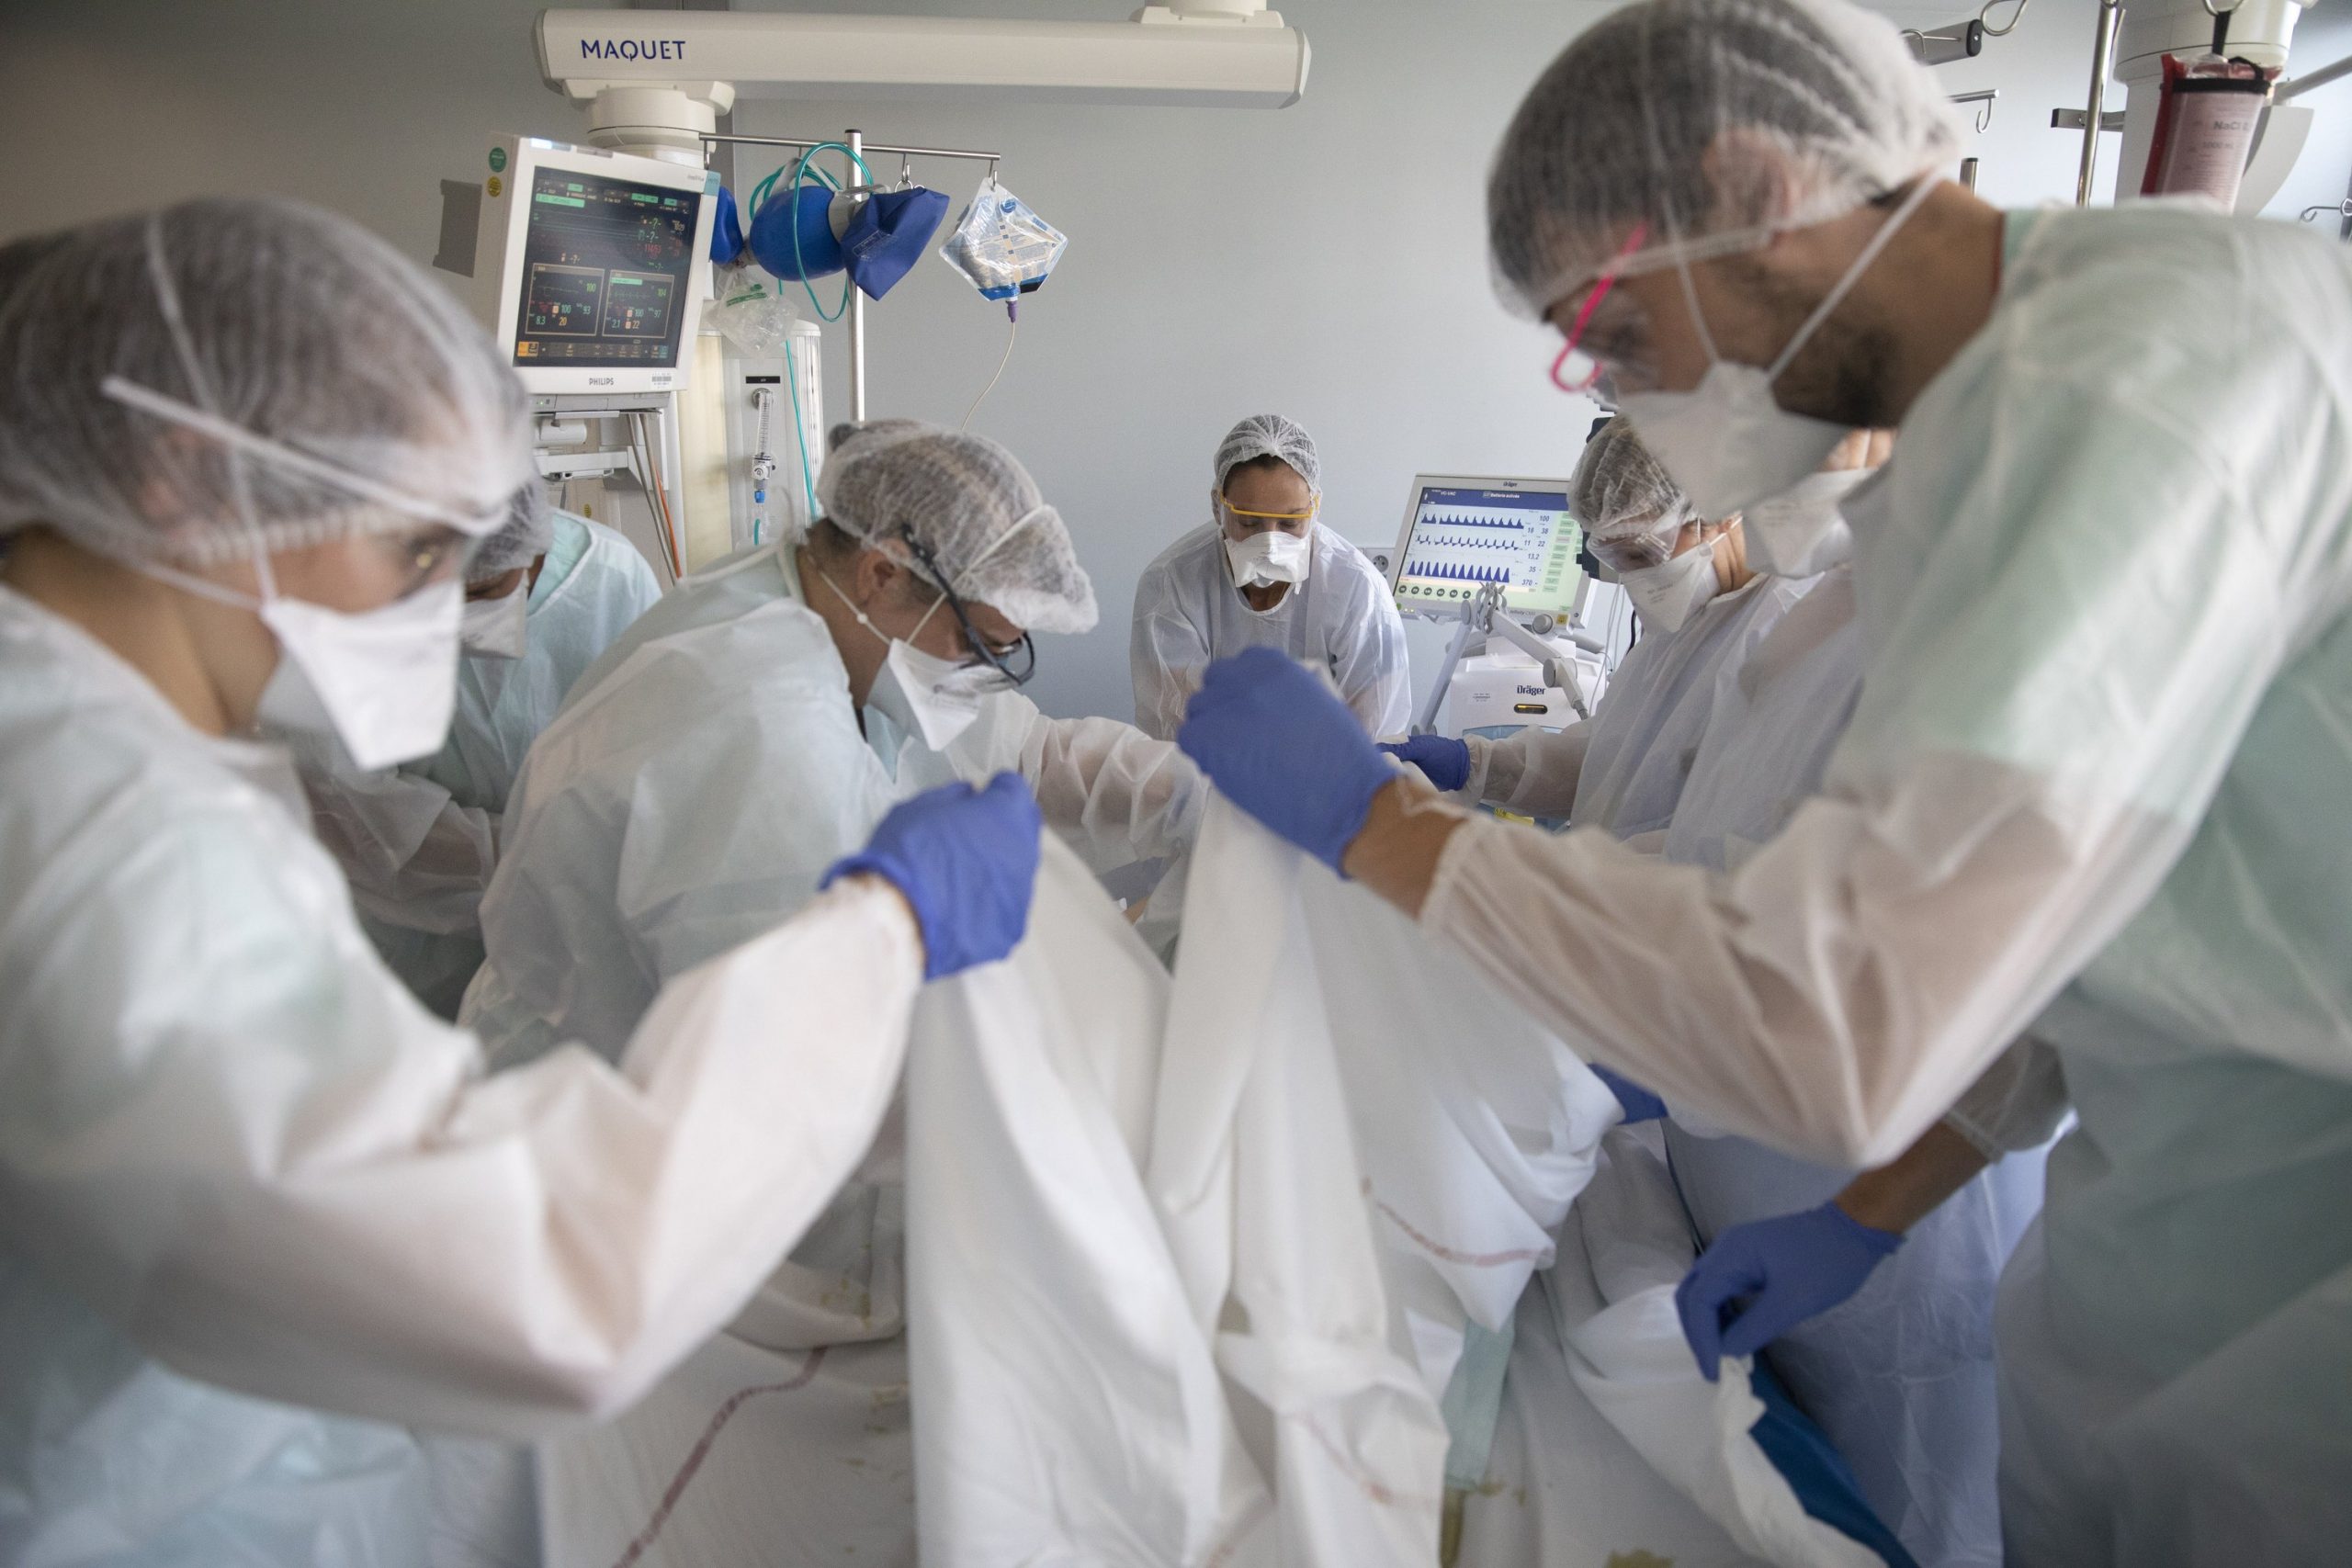 As the virus is filling French intensive care units again, doctors are asking what went wrong